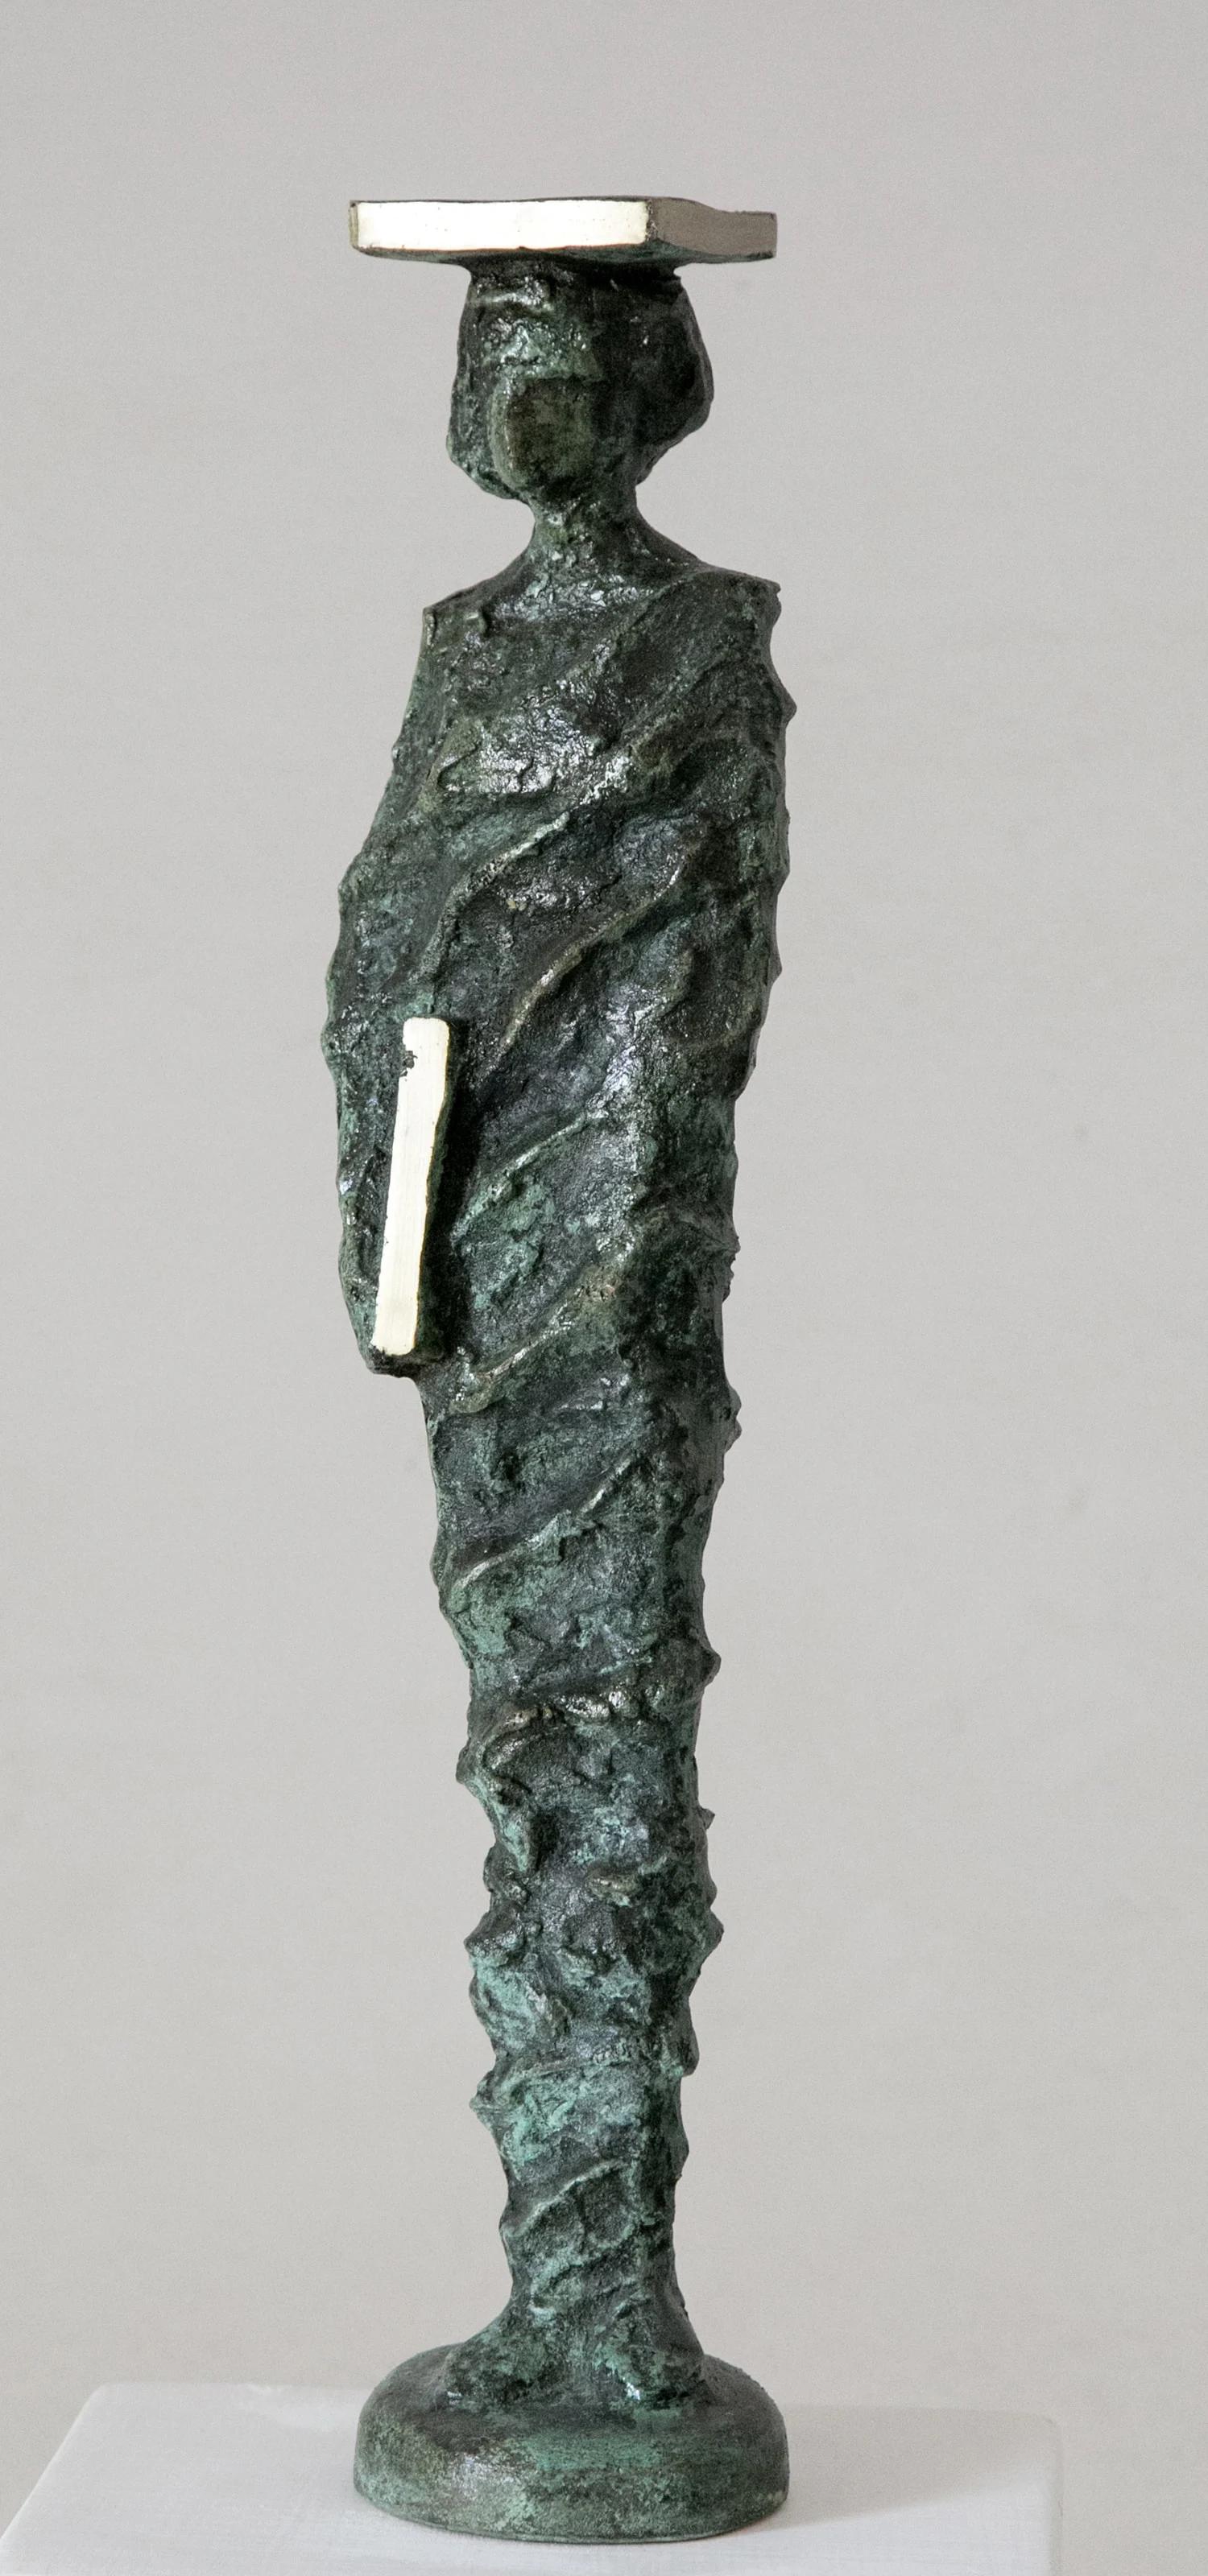 "Graduation I" Bronze Sculpture 19.5" x 4" x 3" inch by Sarkis Tossonian		

Sarkis Tossoonian was born in Alexandria in 1953. He graduated from the Faculty of Fine Arts/Sculpture in 1979. He started exhibiting in individual and group exhibitions in